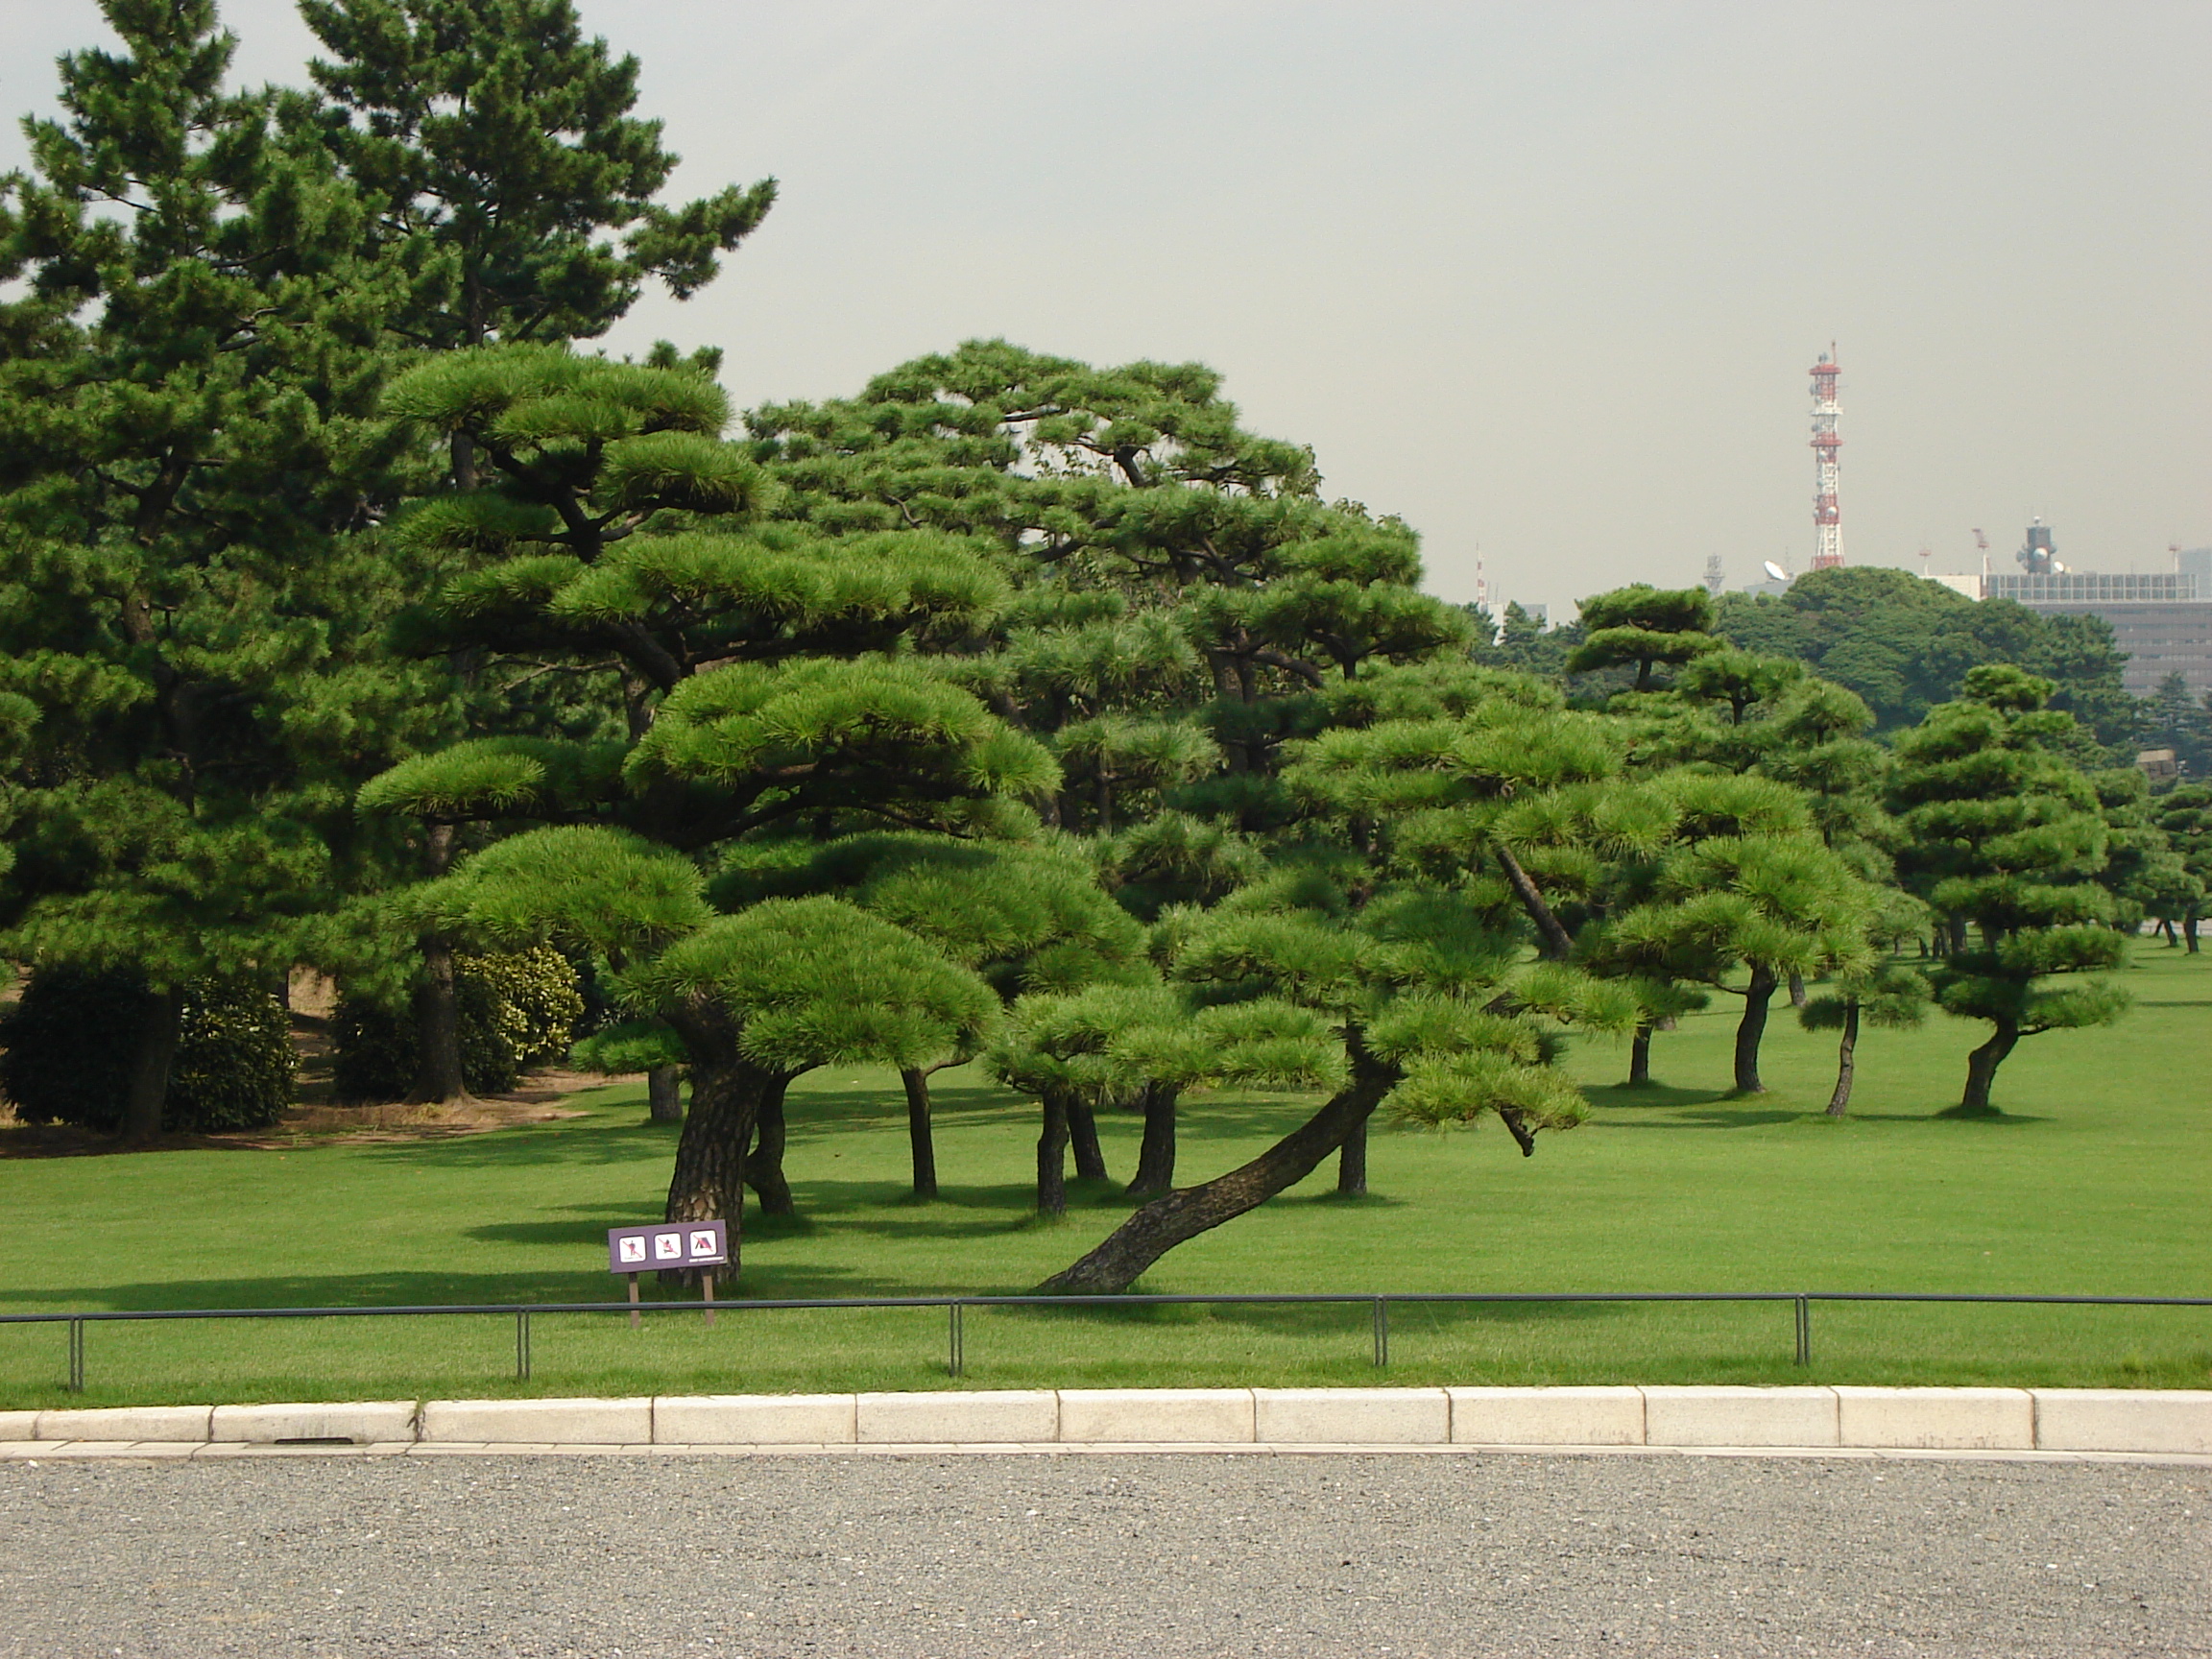 a flat grassy area with manicured trees like giant bonzai